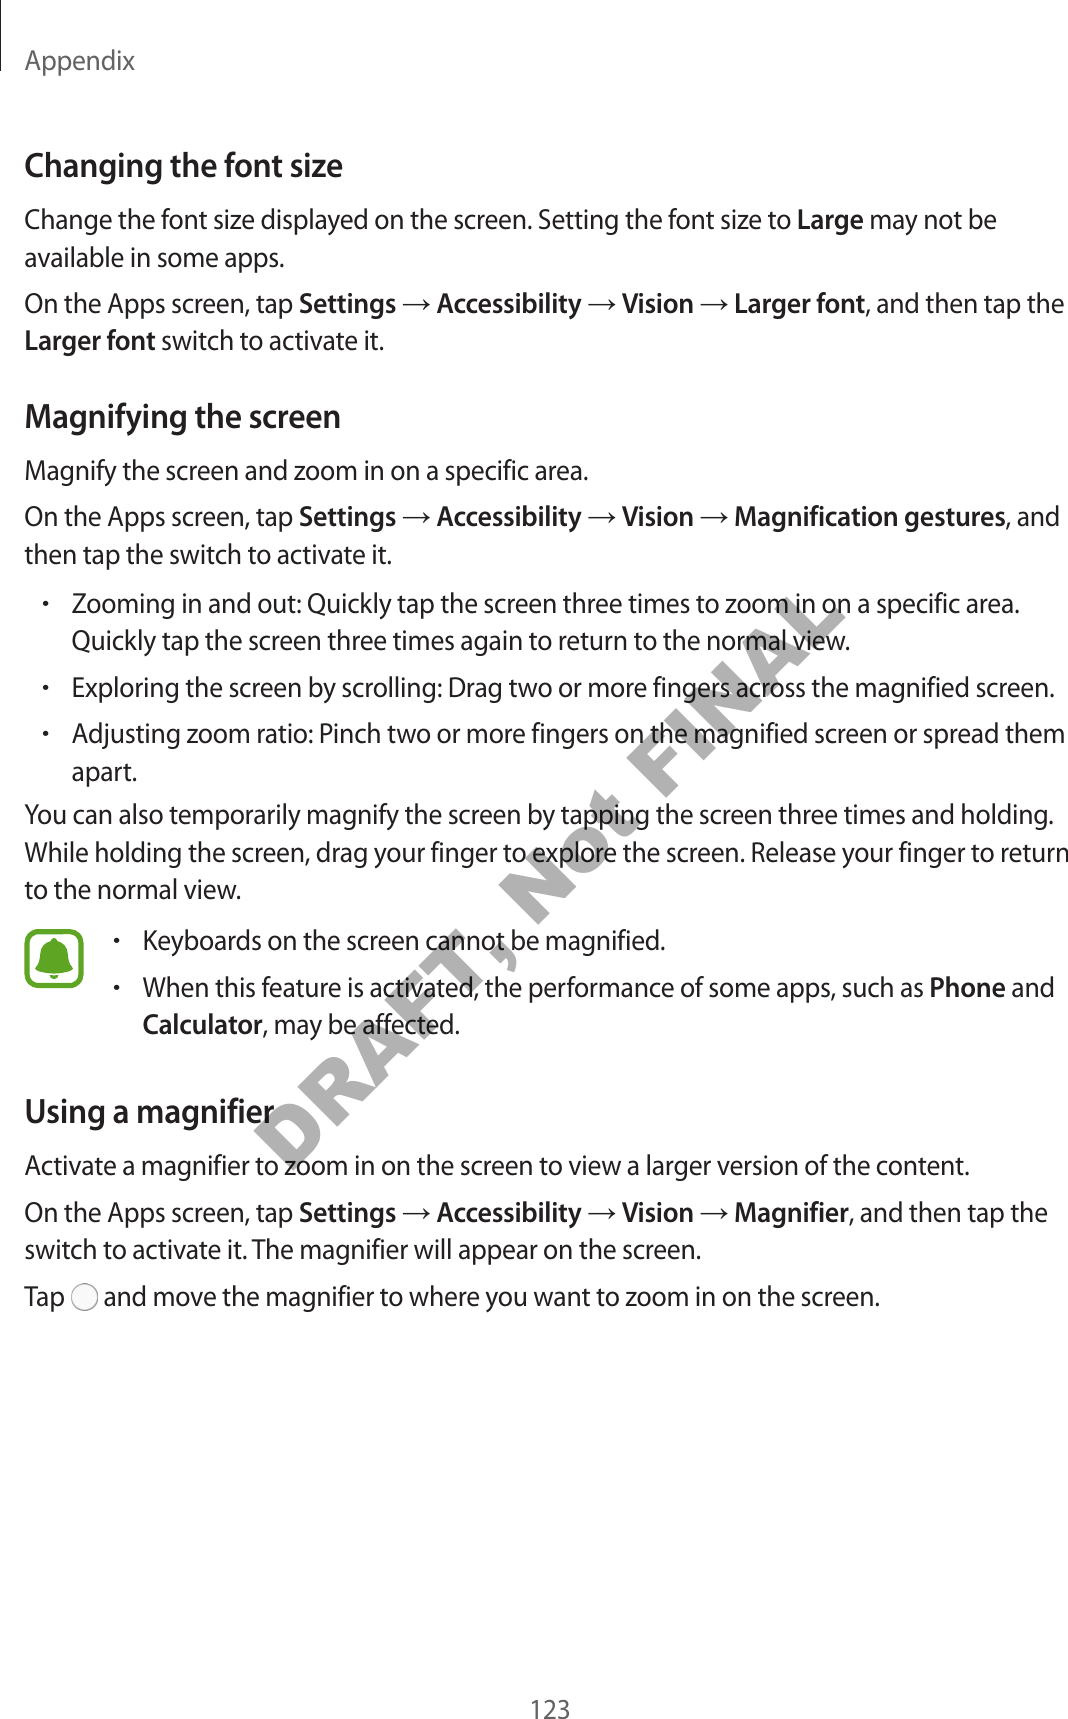 Appendix123Changing the font sizeChange the font size displayed on the screen. Setting the font size to Large may not be available in some apps.On the Apps screen, tap Settings → Accessibility → Vision → Larger font, and then tap the Larger font switch to activate it.Magnifying the screenMagnify the screen and zoom in on a specific area.On the Apps screen, tap Settings → Accessibility → Vision → Magnification gestures, and then tap the switch to activate it.•Zooming in and out: Quickly tap the screen three times to zoom in on a specific area. Quickly tap the screen three times again to return to the normal view.•Exploring the screen by scrolling: Drag two or more fingers across the magnified screen.•Adjusting zoom ratio: Pinch two or more fingers on the magnified screen or spread them apart.You can also temporarily magnify the screen by tapping the screen three times and holding. While holding the screen, drag your finger to explore the screen. Release your finger to return to the normal view.•Keyboards on the screen cannot be magnified.•When this feature is activated, the performance of some apps, such as Phone and Calculator, may be affected.Using a magnifierActivate a magnifier to zoom in on the screen to view a larger version of the content.On the Apps screen, tap Settings → Accessibility → Vision → Magnifier, and then tap the switch to activate it. The magnifier will appear on the screen.Tap   and move the magnifier to where you want to zoom in on the screen.DRAFT, Not FINAL